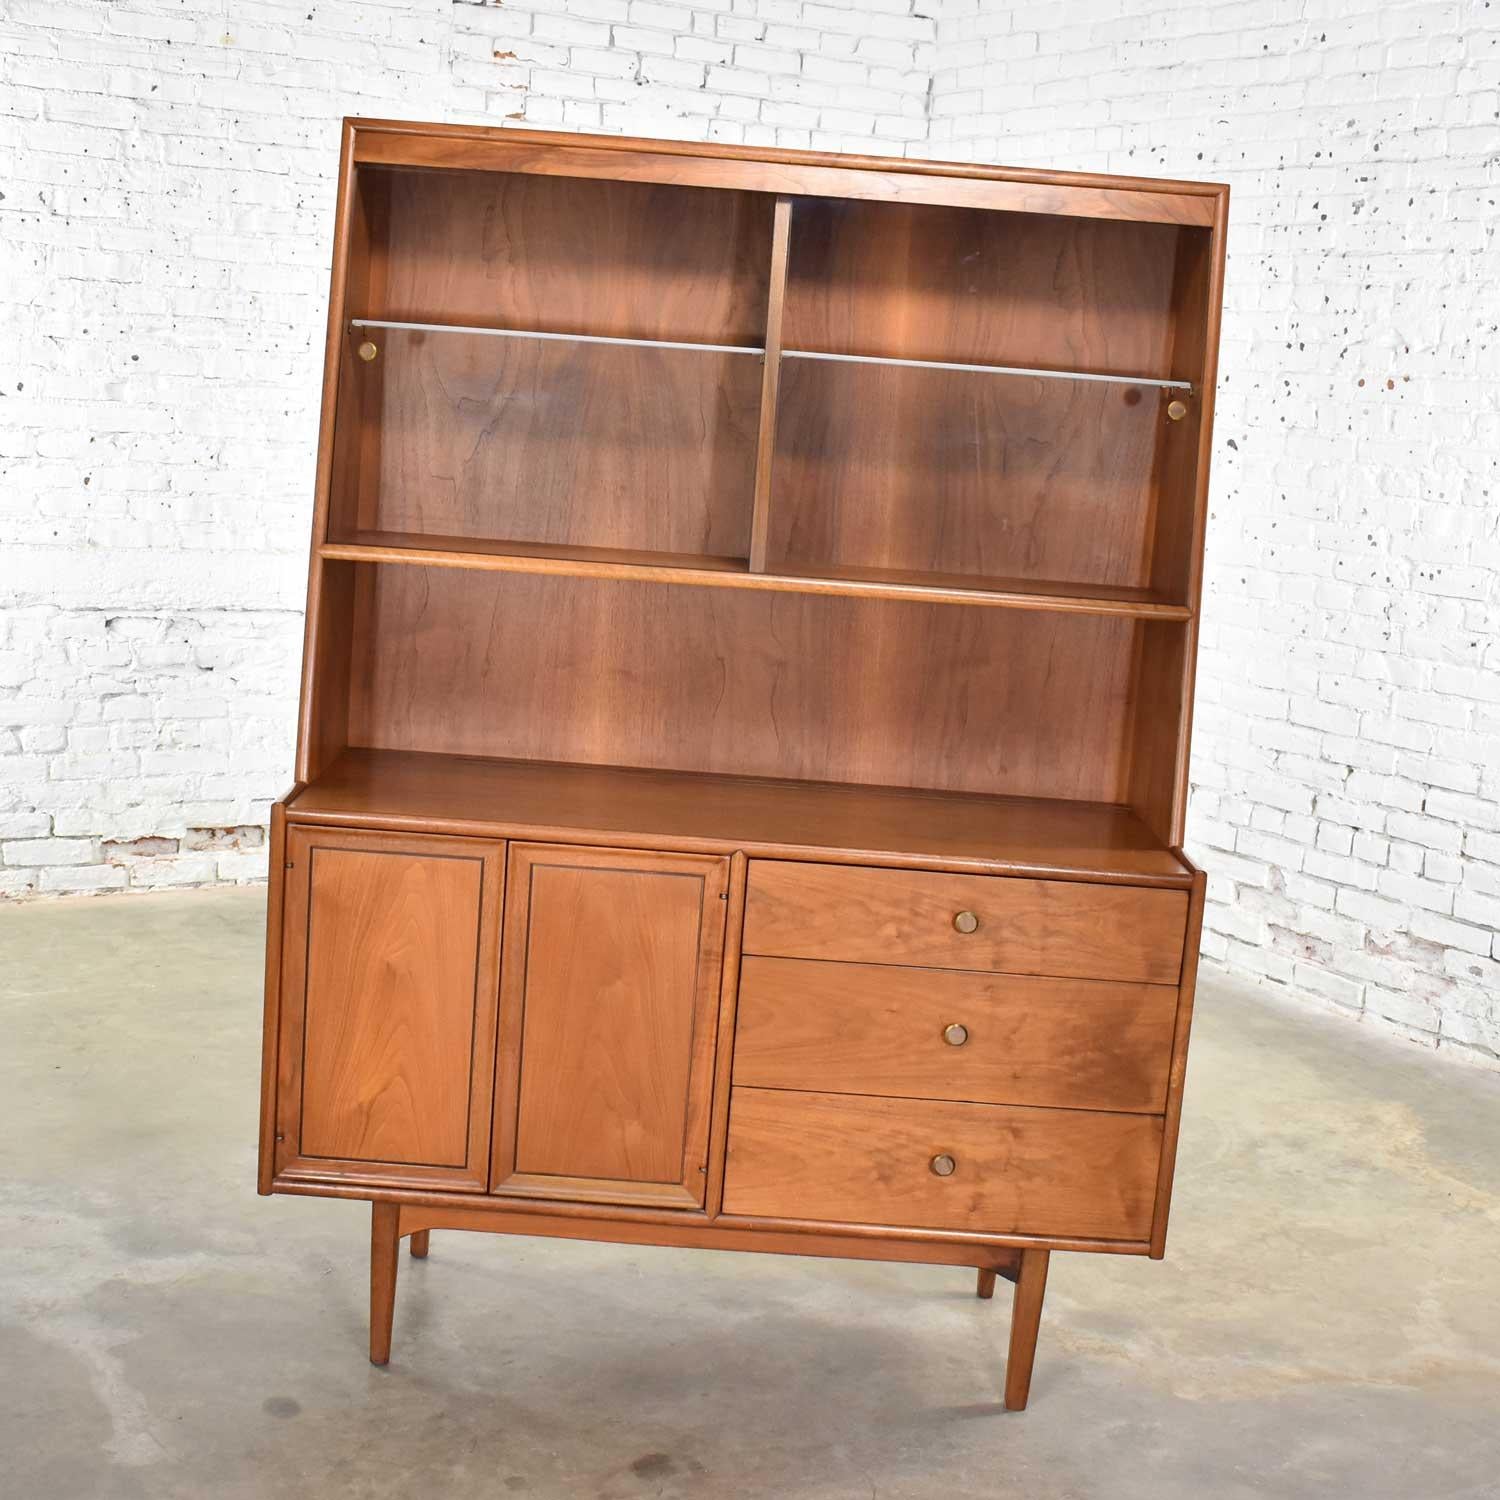 Handsome Mid-Century Modern walnut china hutch cabinet with glass upper doors by Kipp Stewart and Stewart MacDougall. It is in fabulous vintage condition overall. There is normal patina for its age and use. This piece has been very well cared for.